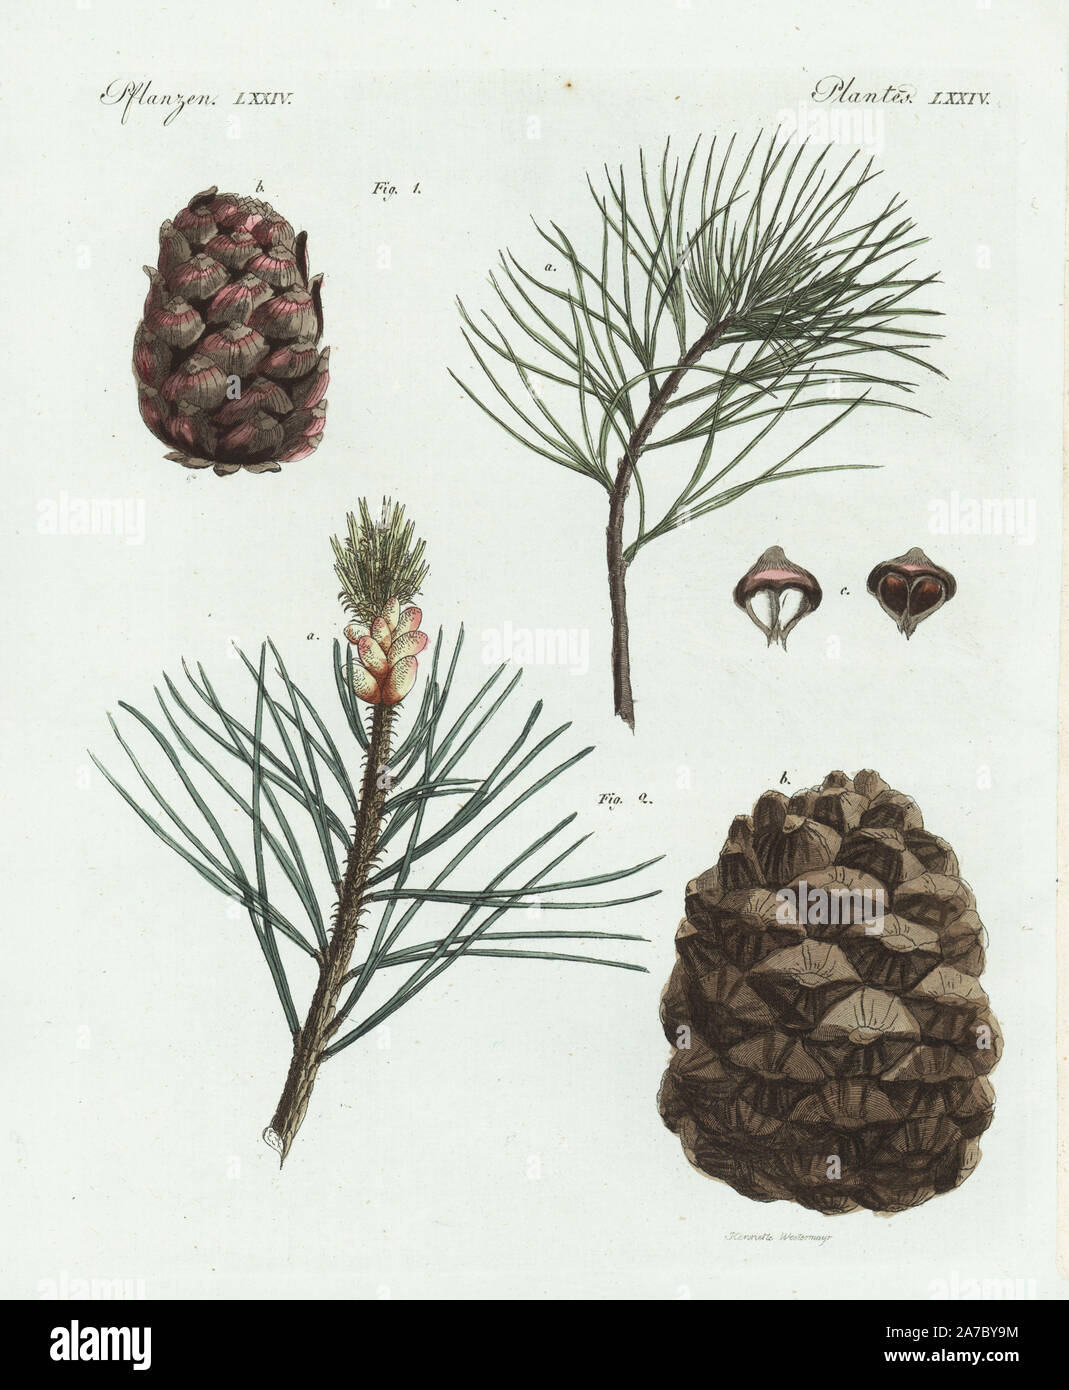 Swiss pine or arolla pine, Pinus cembra 1, branch with flower a, cone b, nut c, and stone pine, Pinus pinea 2, branch a, cone b. Handcoloured copperplate engraving from Bertuch's 'Bilderbuch fur Kinder' (Picture Book for Children), Weimar, 1798. Friedrich Johann Bertuch (1747-1822) was a German publisher and man of arts most famous for his 12-volume encyclopedia for children illustrated with 1,200 engraved plates on natural history, science, costume, mythology, etc., published from 1790-1830. Stock Photo